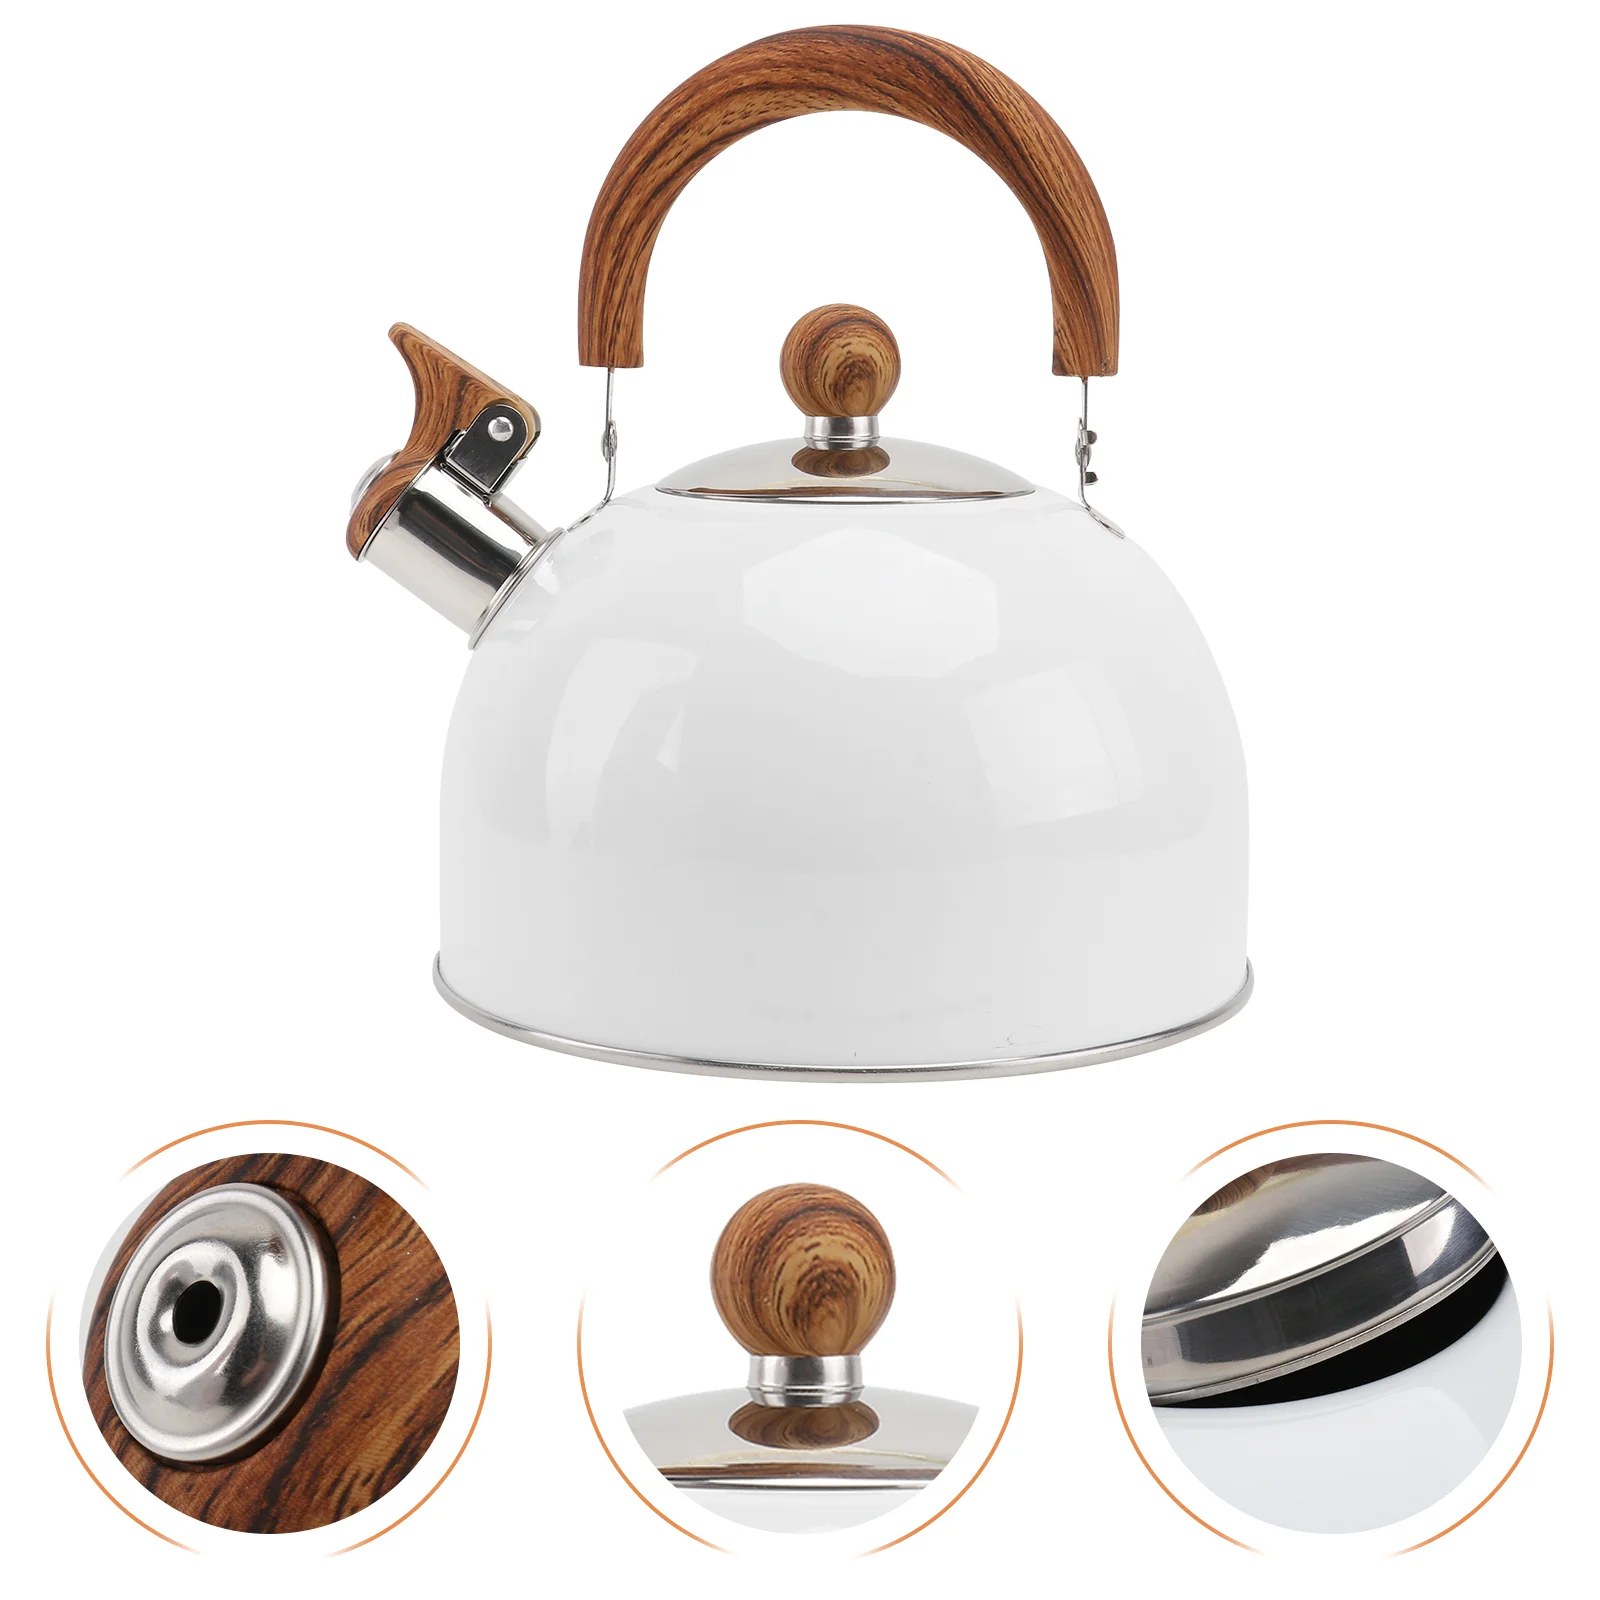 

Kettle Tea Pot Stove Whistlingstovetop Gas Camping Water Metal Handheld Whistlestainlesscoffee Steel Household Classic Camp